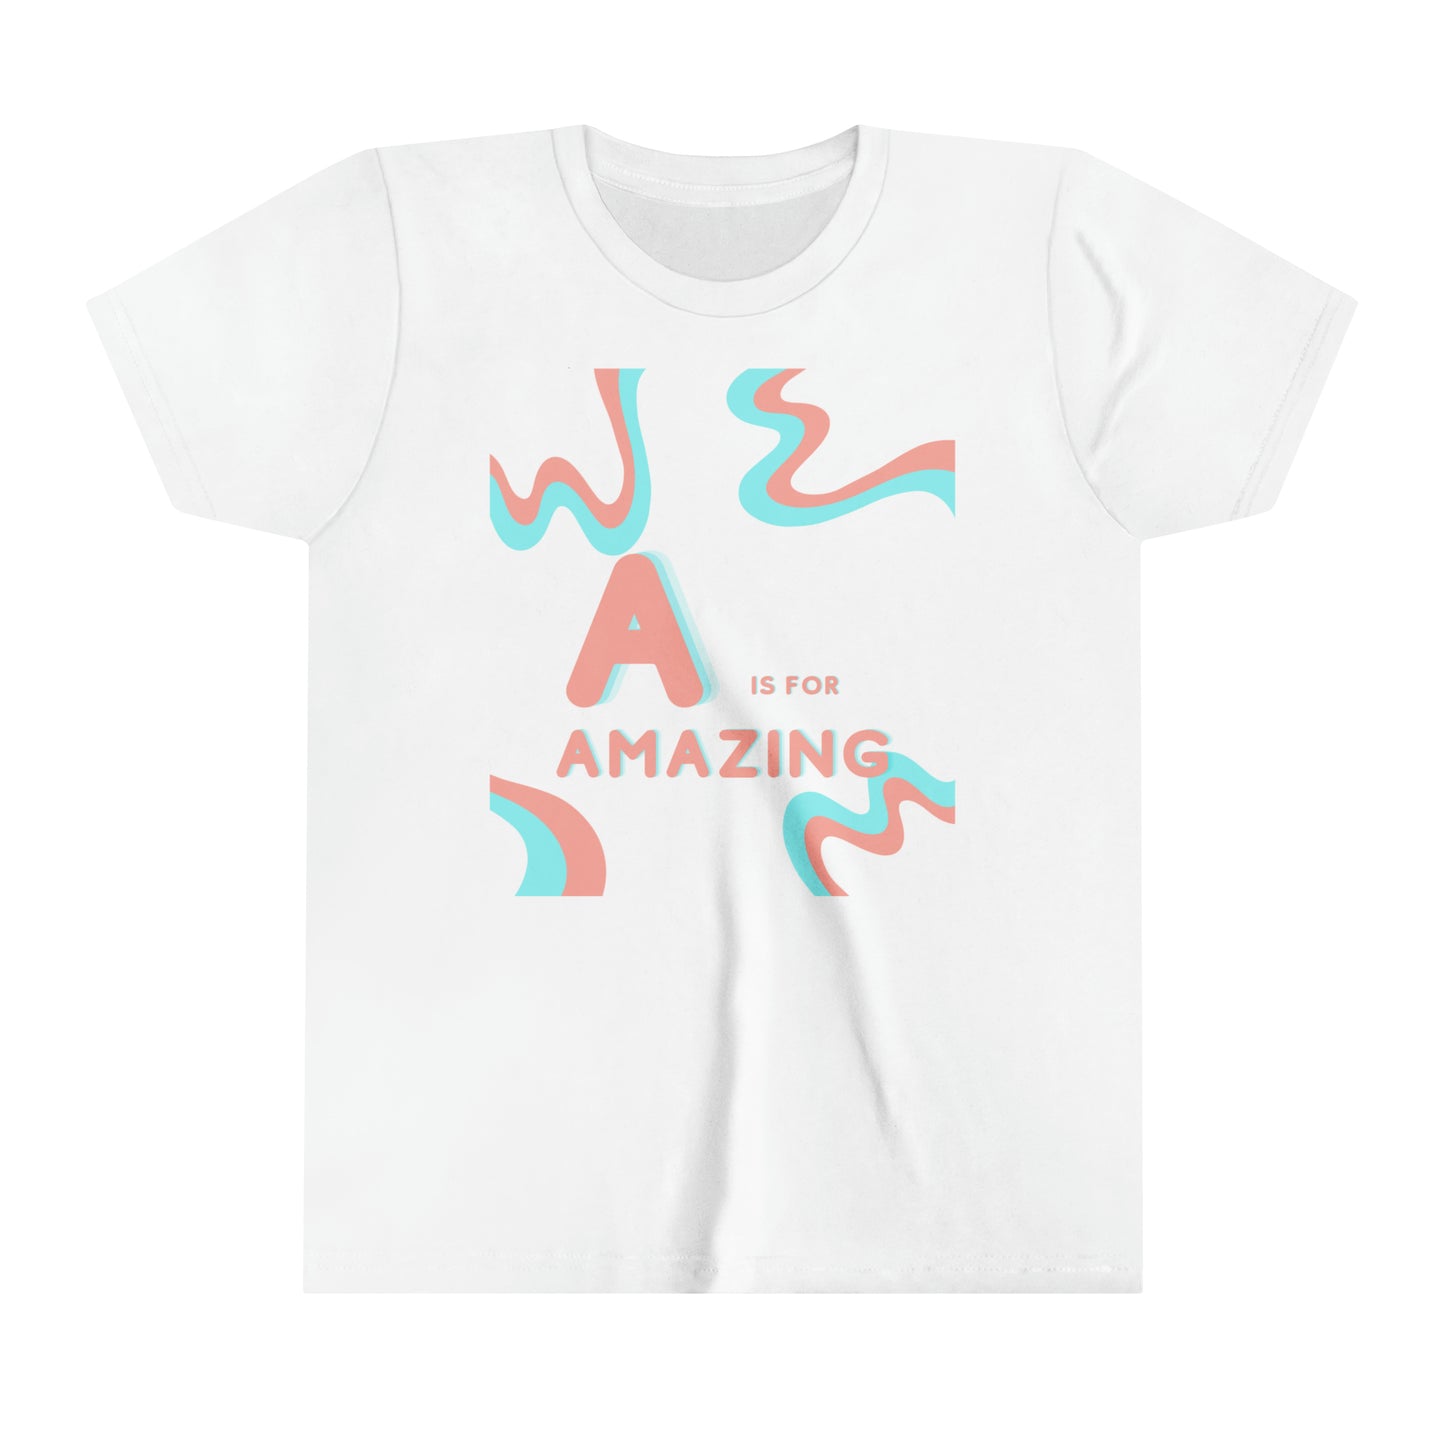 A is for Amazing shirt, Girl Short Sleeve Tee, Girls Tee, Girls Shirt, Gift for Daughters, gift for girls